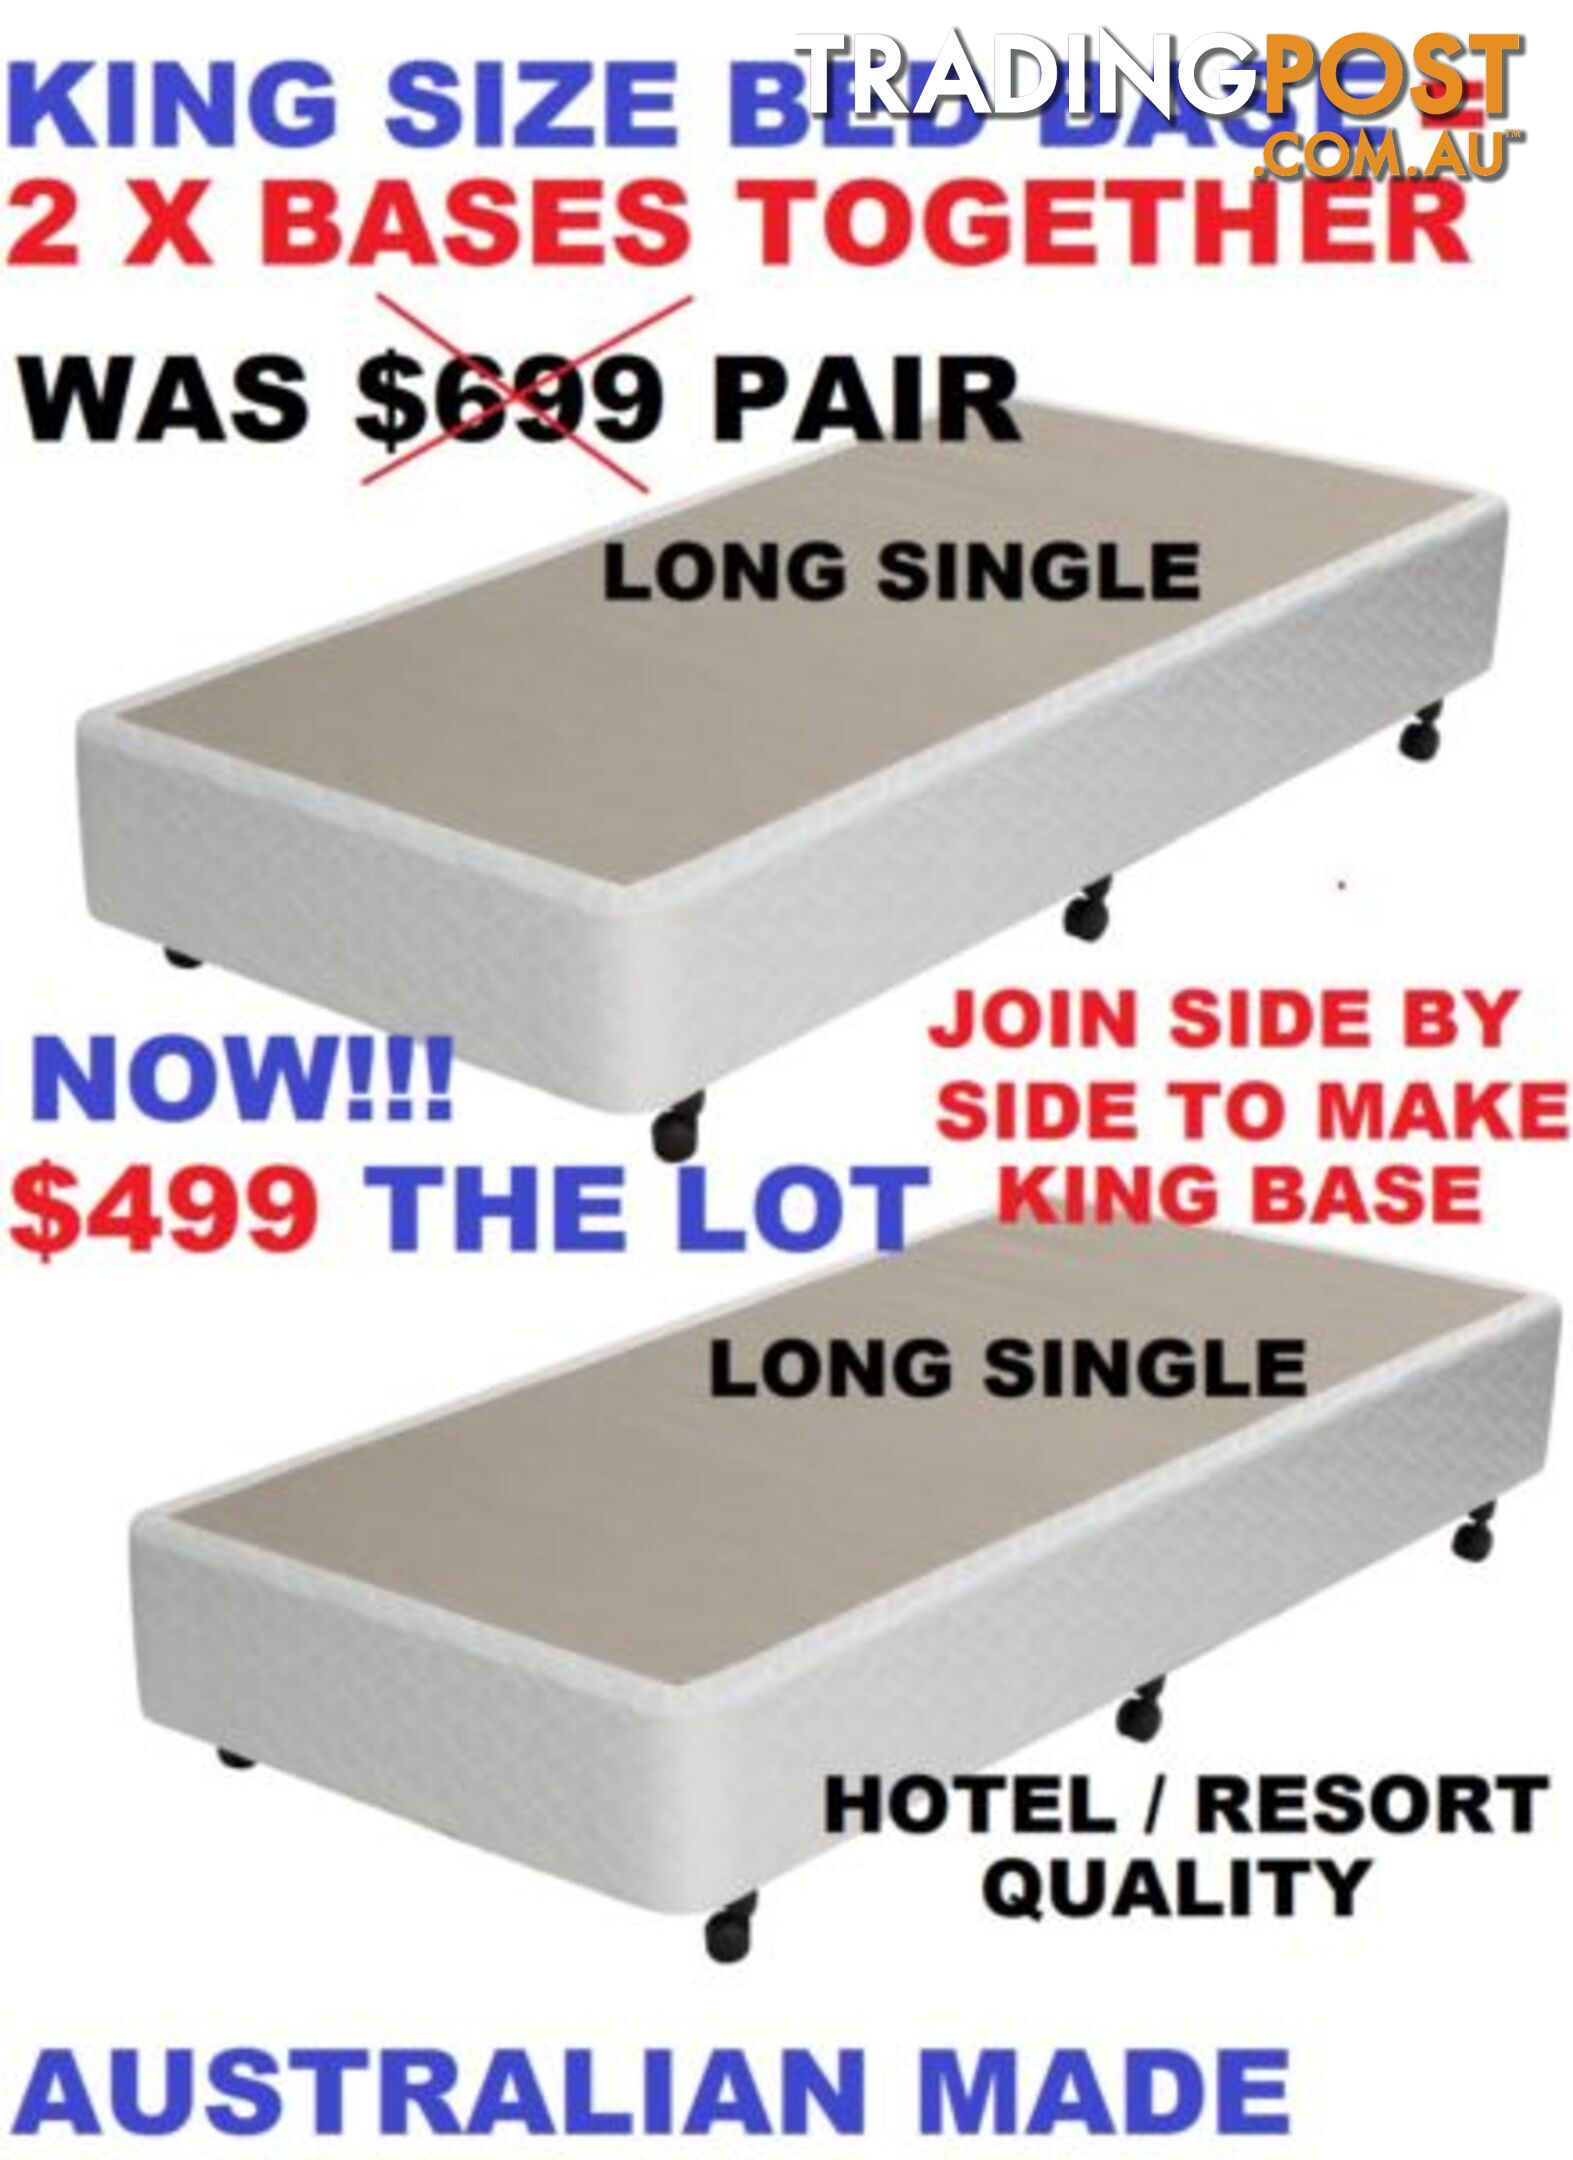 NEW BED BASE KING, QUEEN, DOUBLE, KING SINGLE, SINGLE